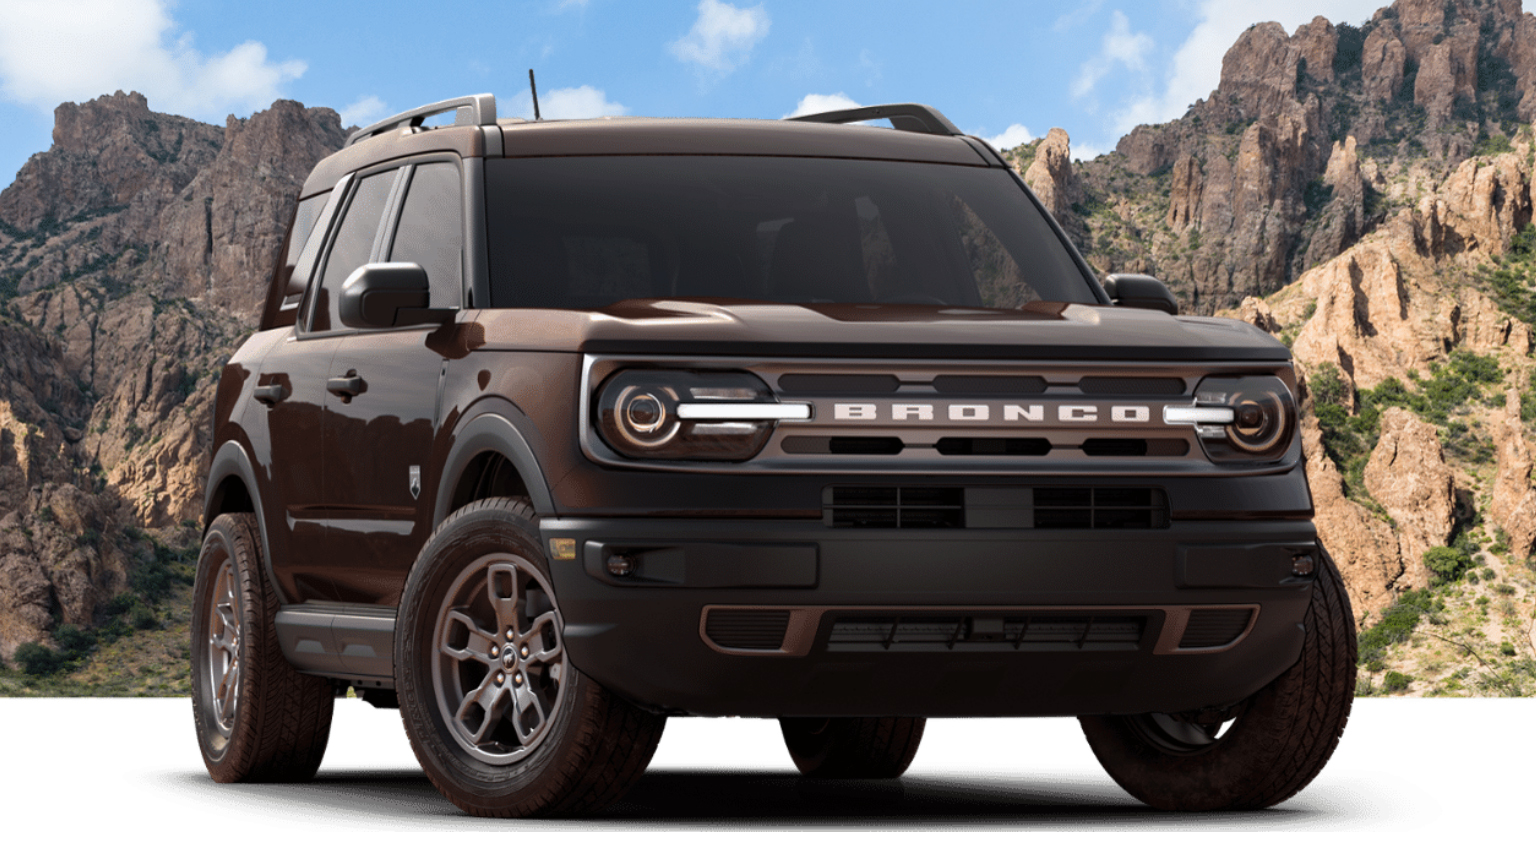 2021 Ford Bronco Sport pricing revealed, starts at $28,000 - Autoblog